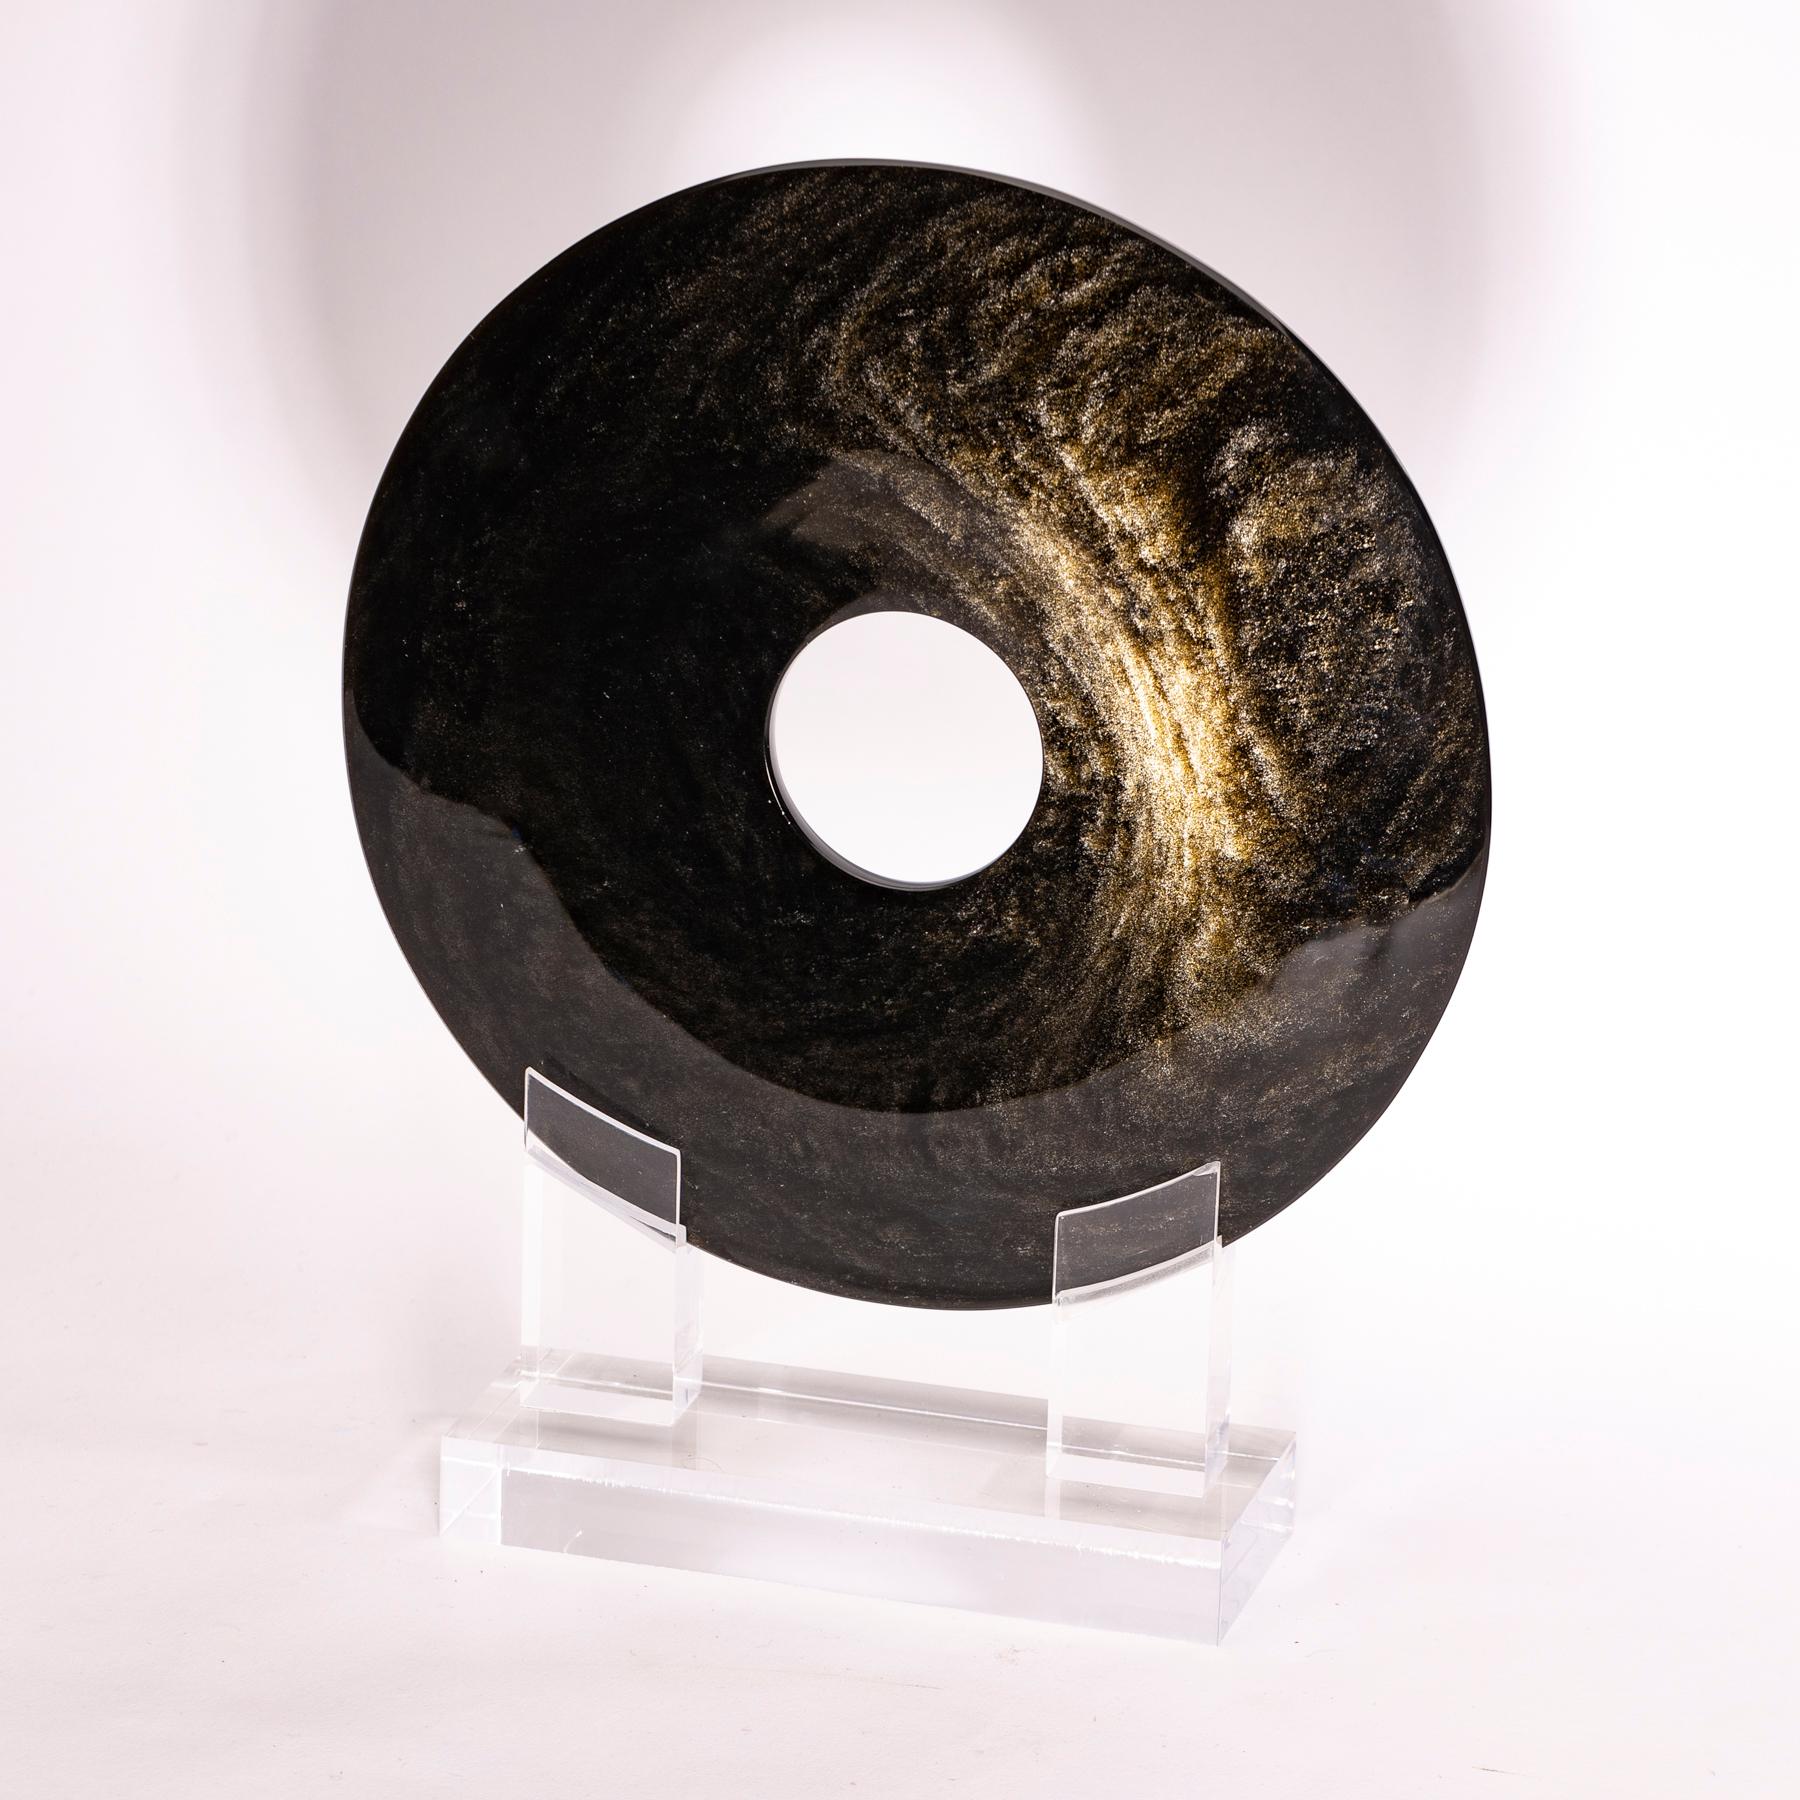 Organic Modern Mexican Obsidian with Gold Shine Disk Sculpture on Custom Acrylic Base